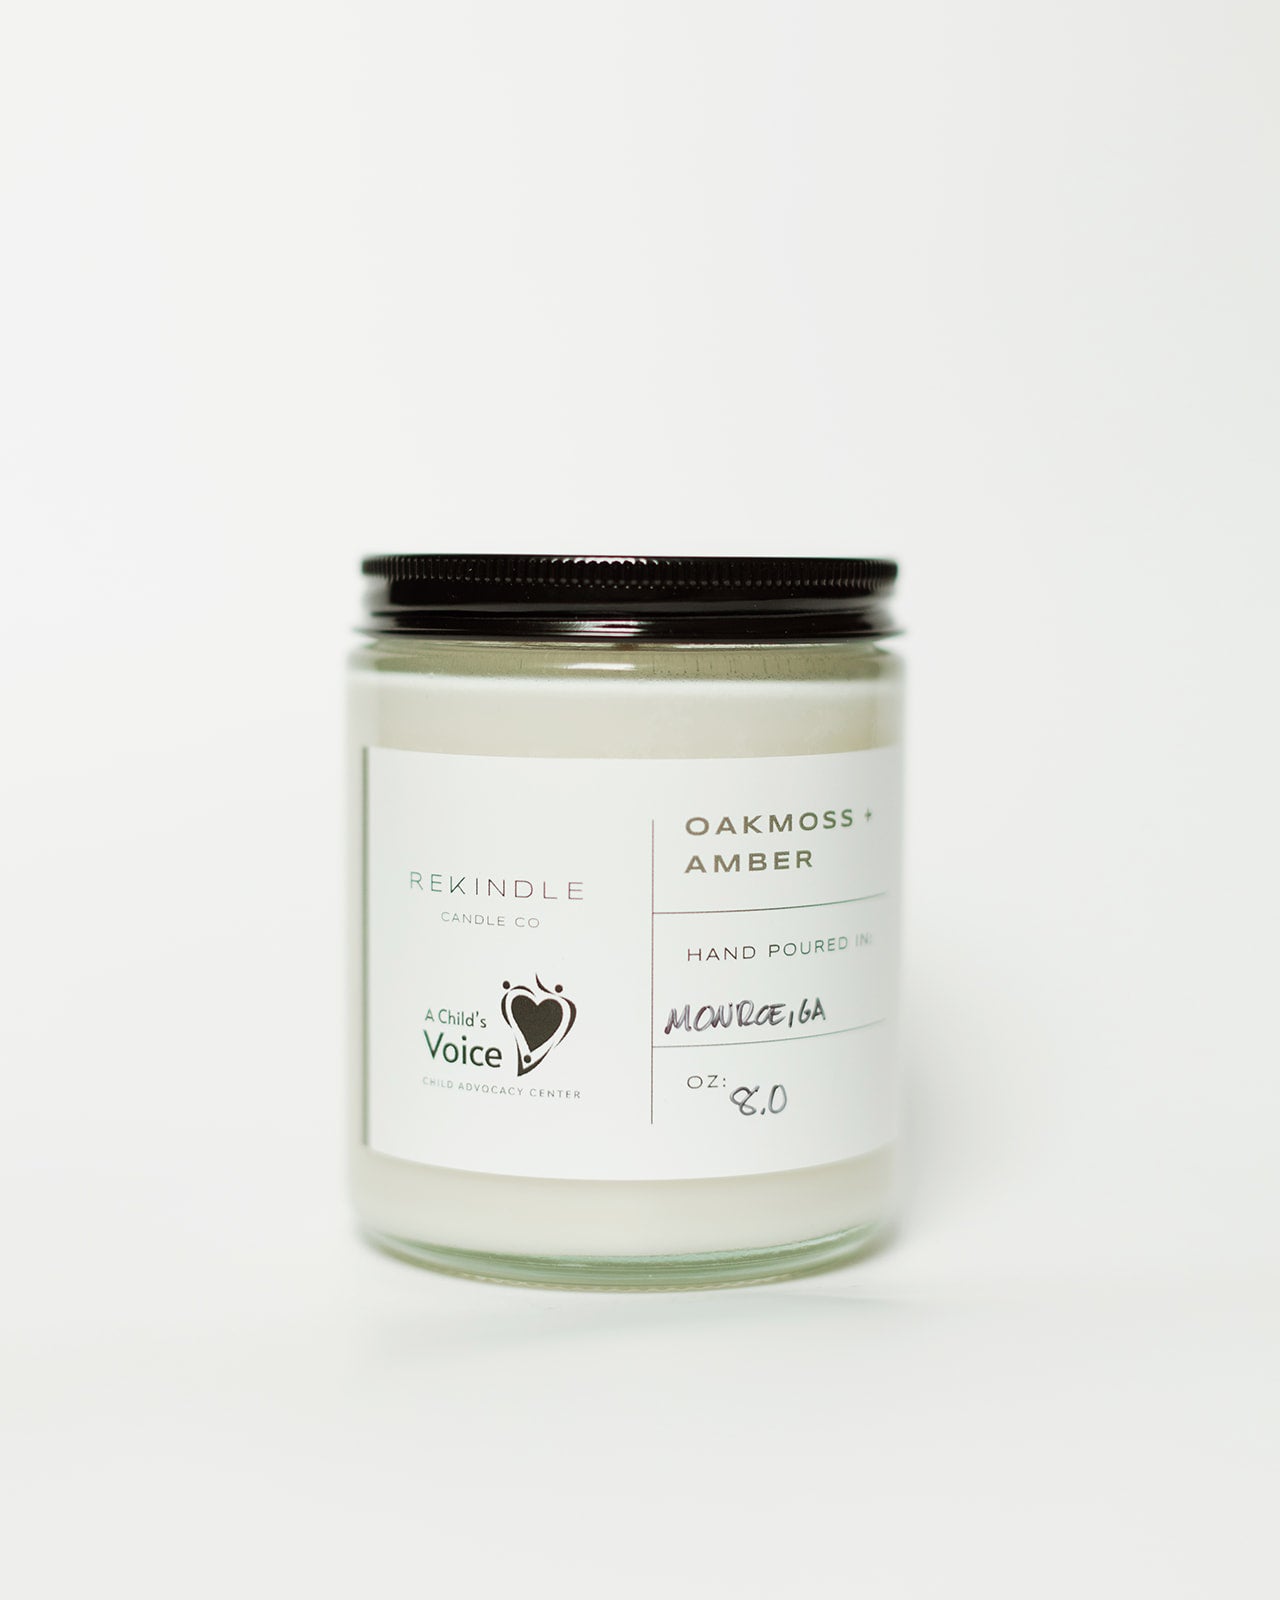 A Child's Voice - Oakmoss + Amber Soy Candle